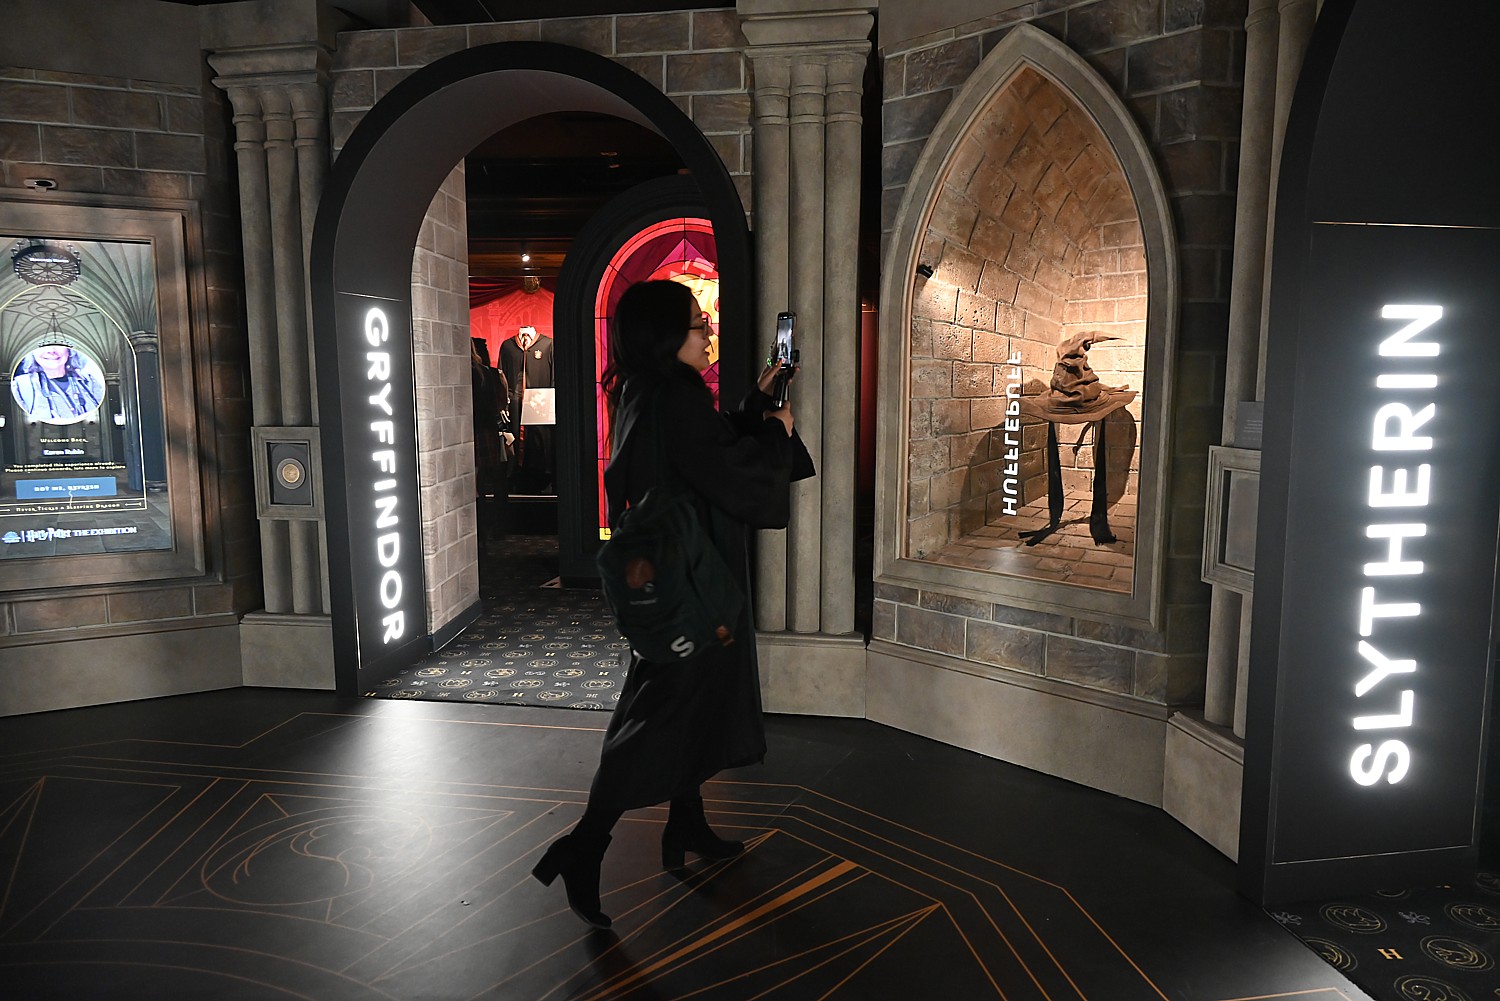 Harry Potter: The Exhibition - review